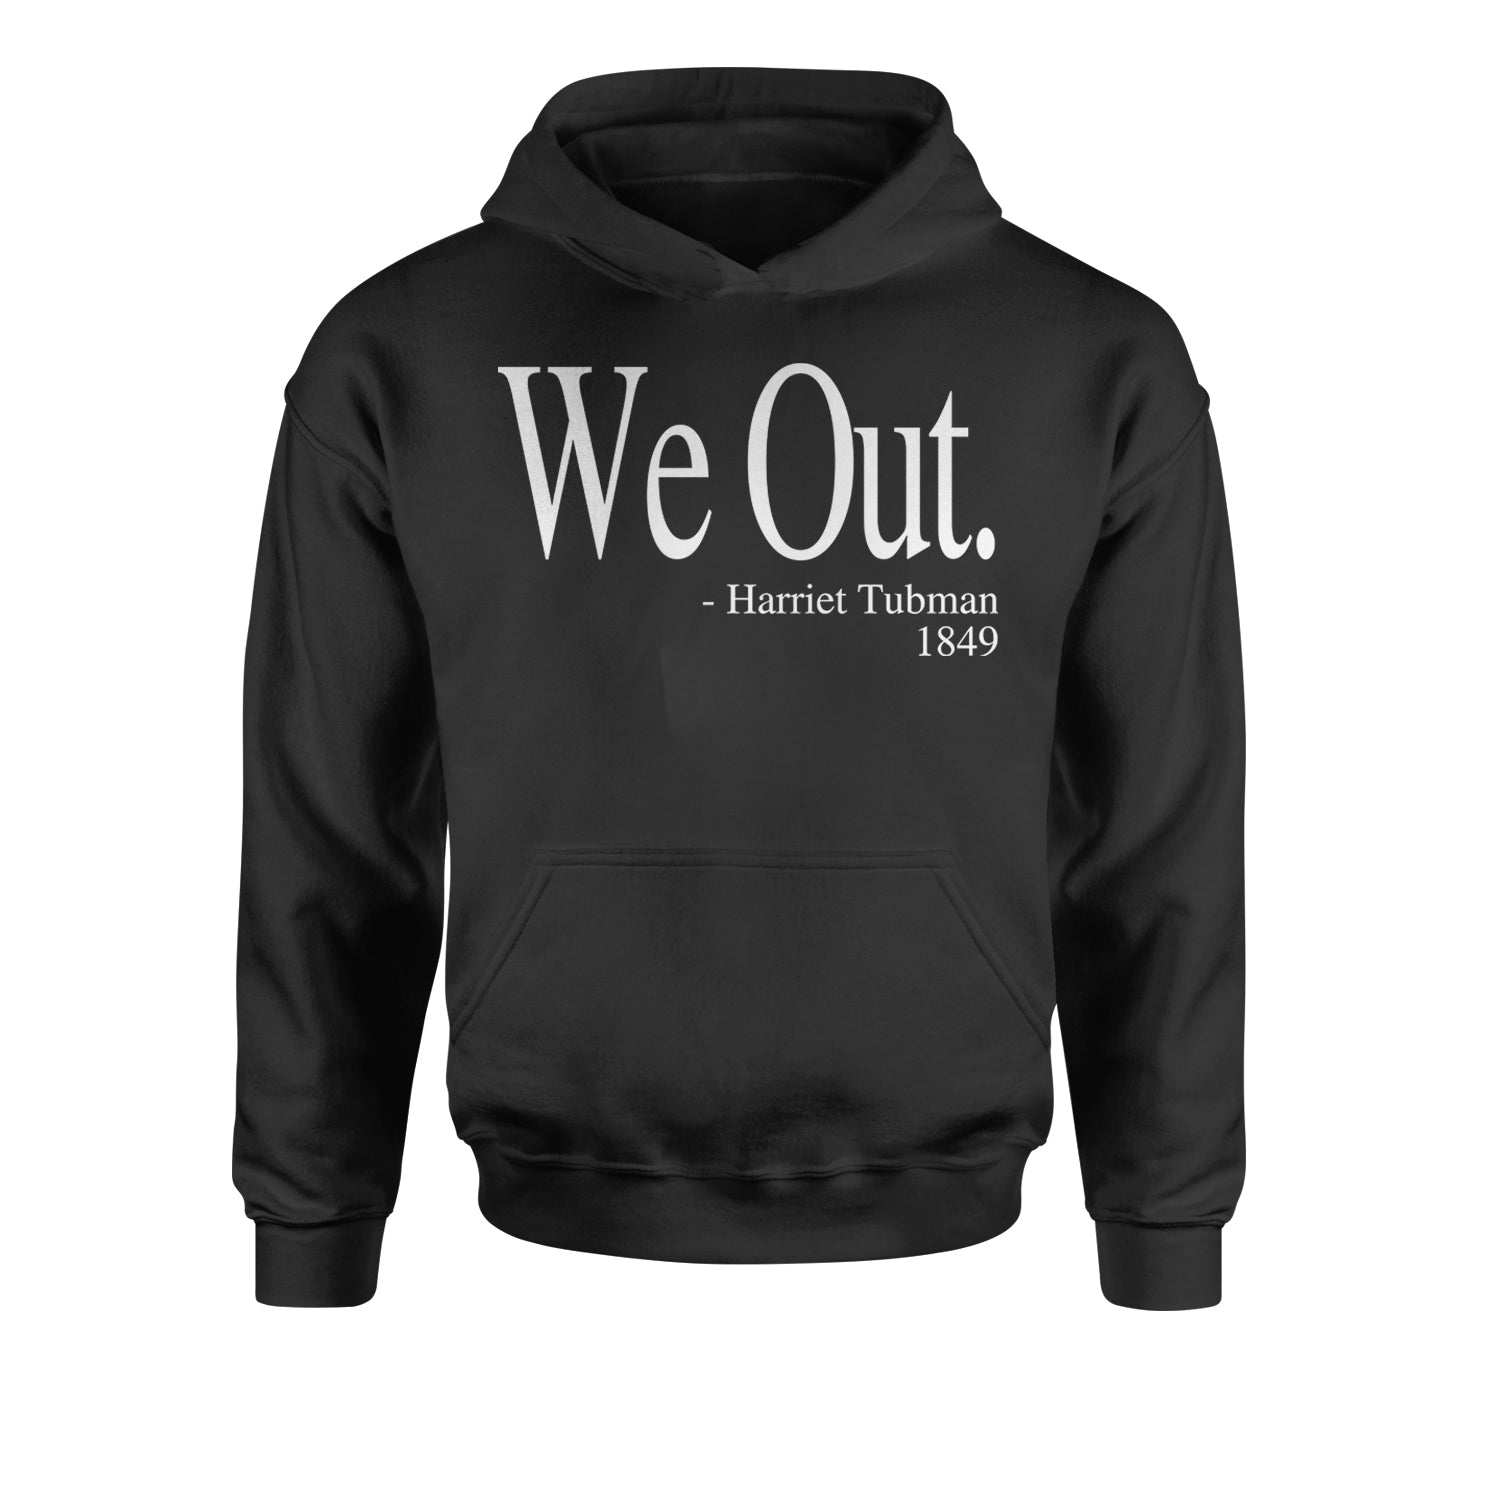 We Out Harriet Tubman Funny Quote Youth-Sized Hoodie